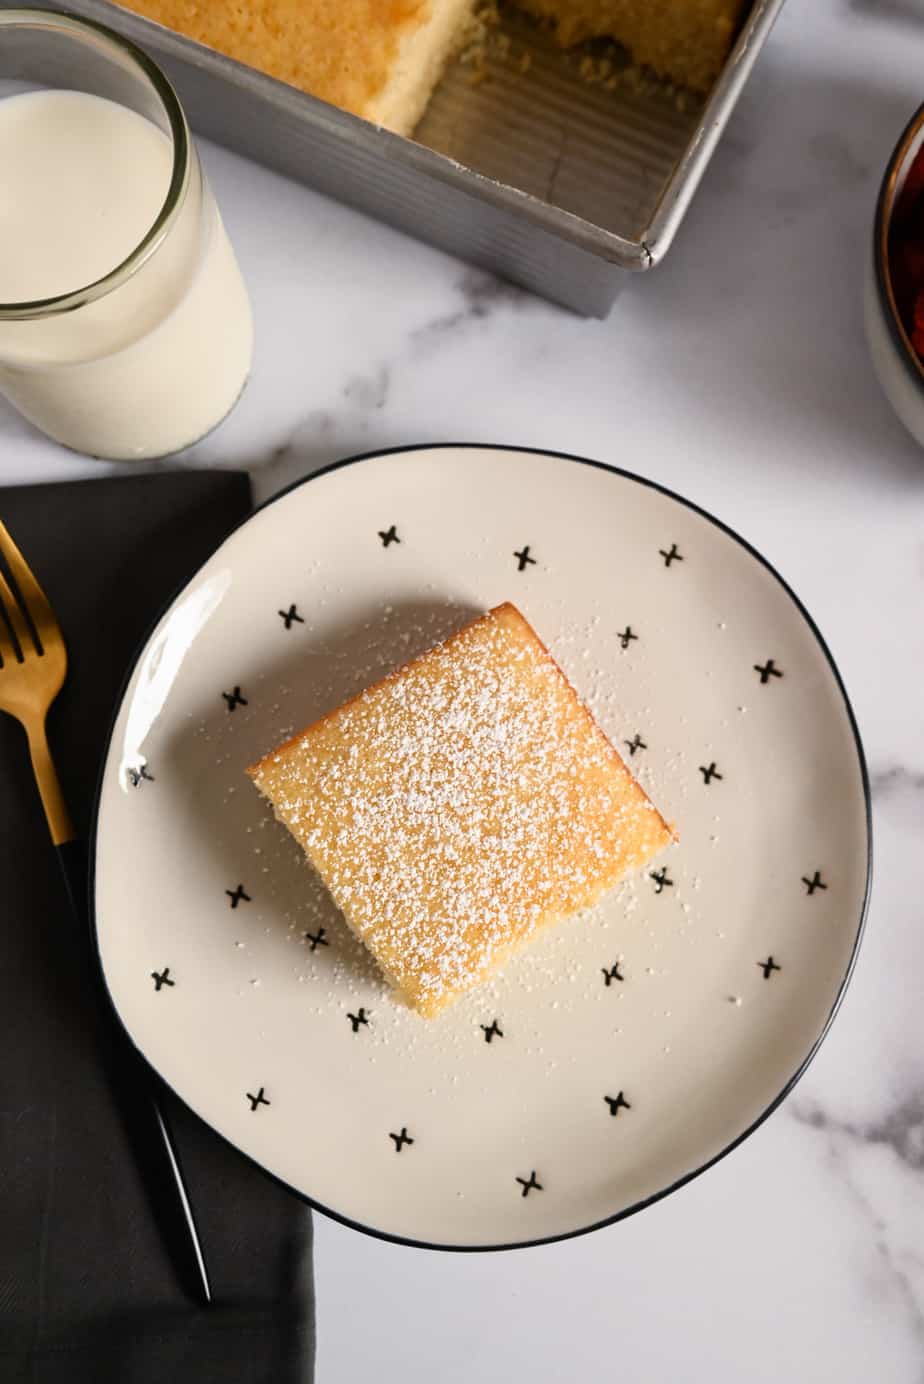 Slice of yellow cake dusted with powdered sugar on a white and black plate